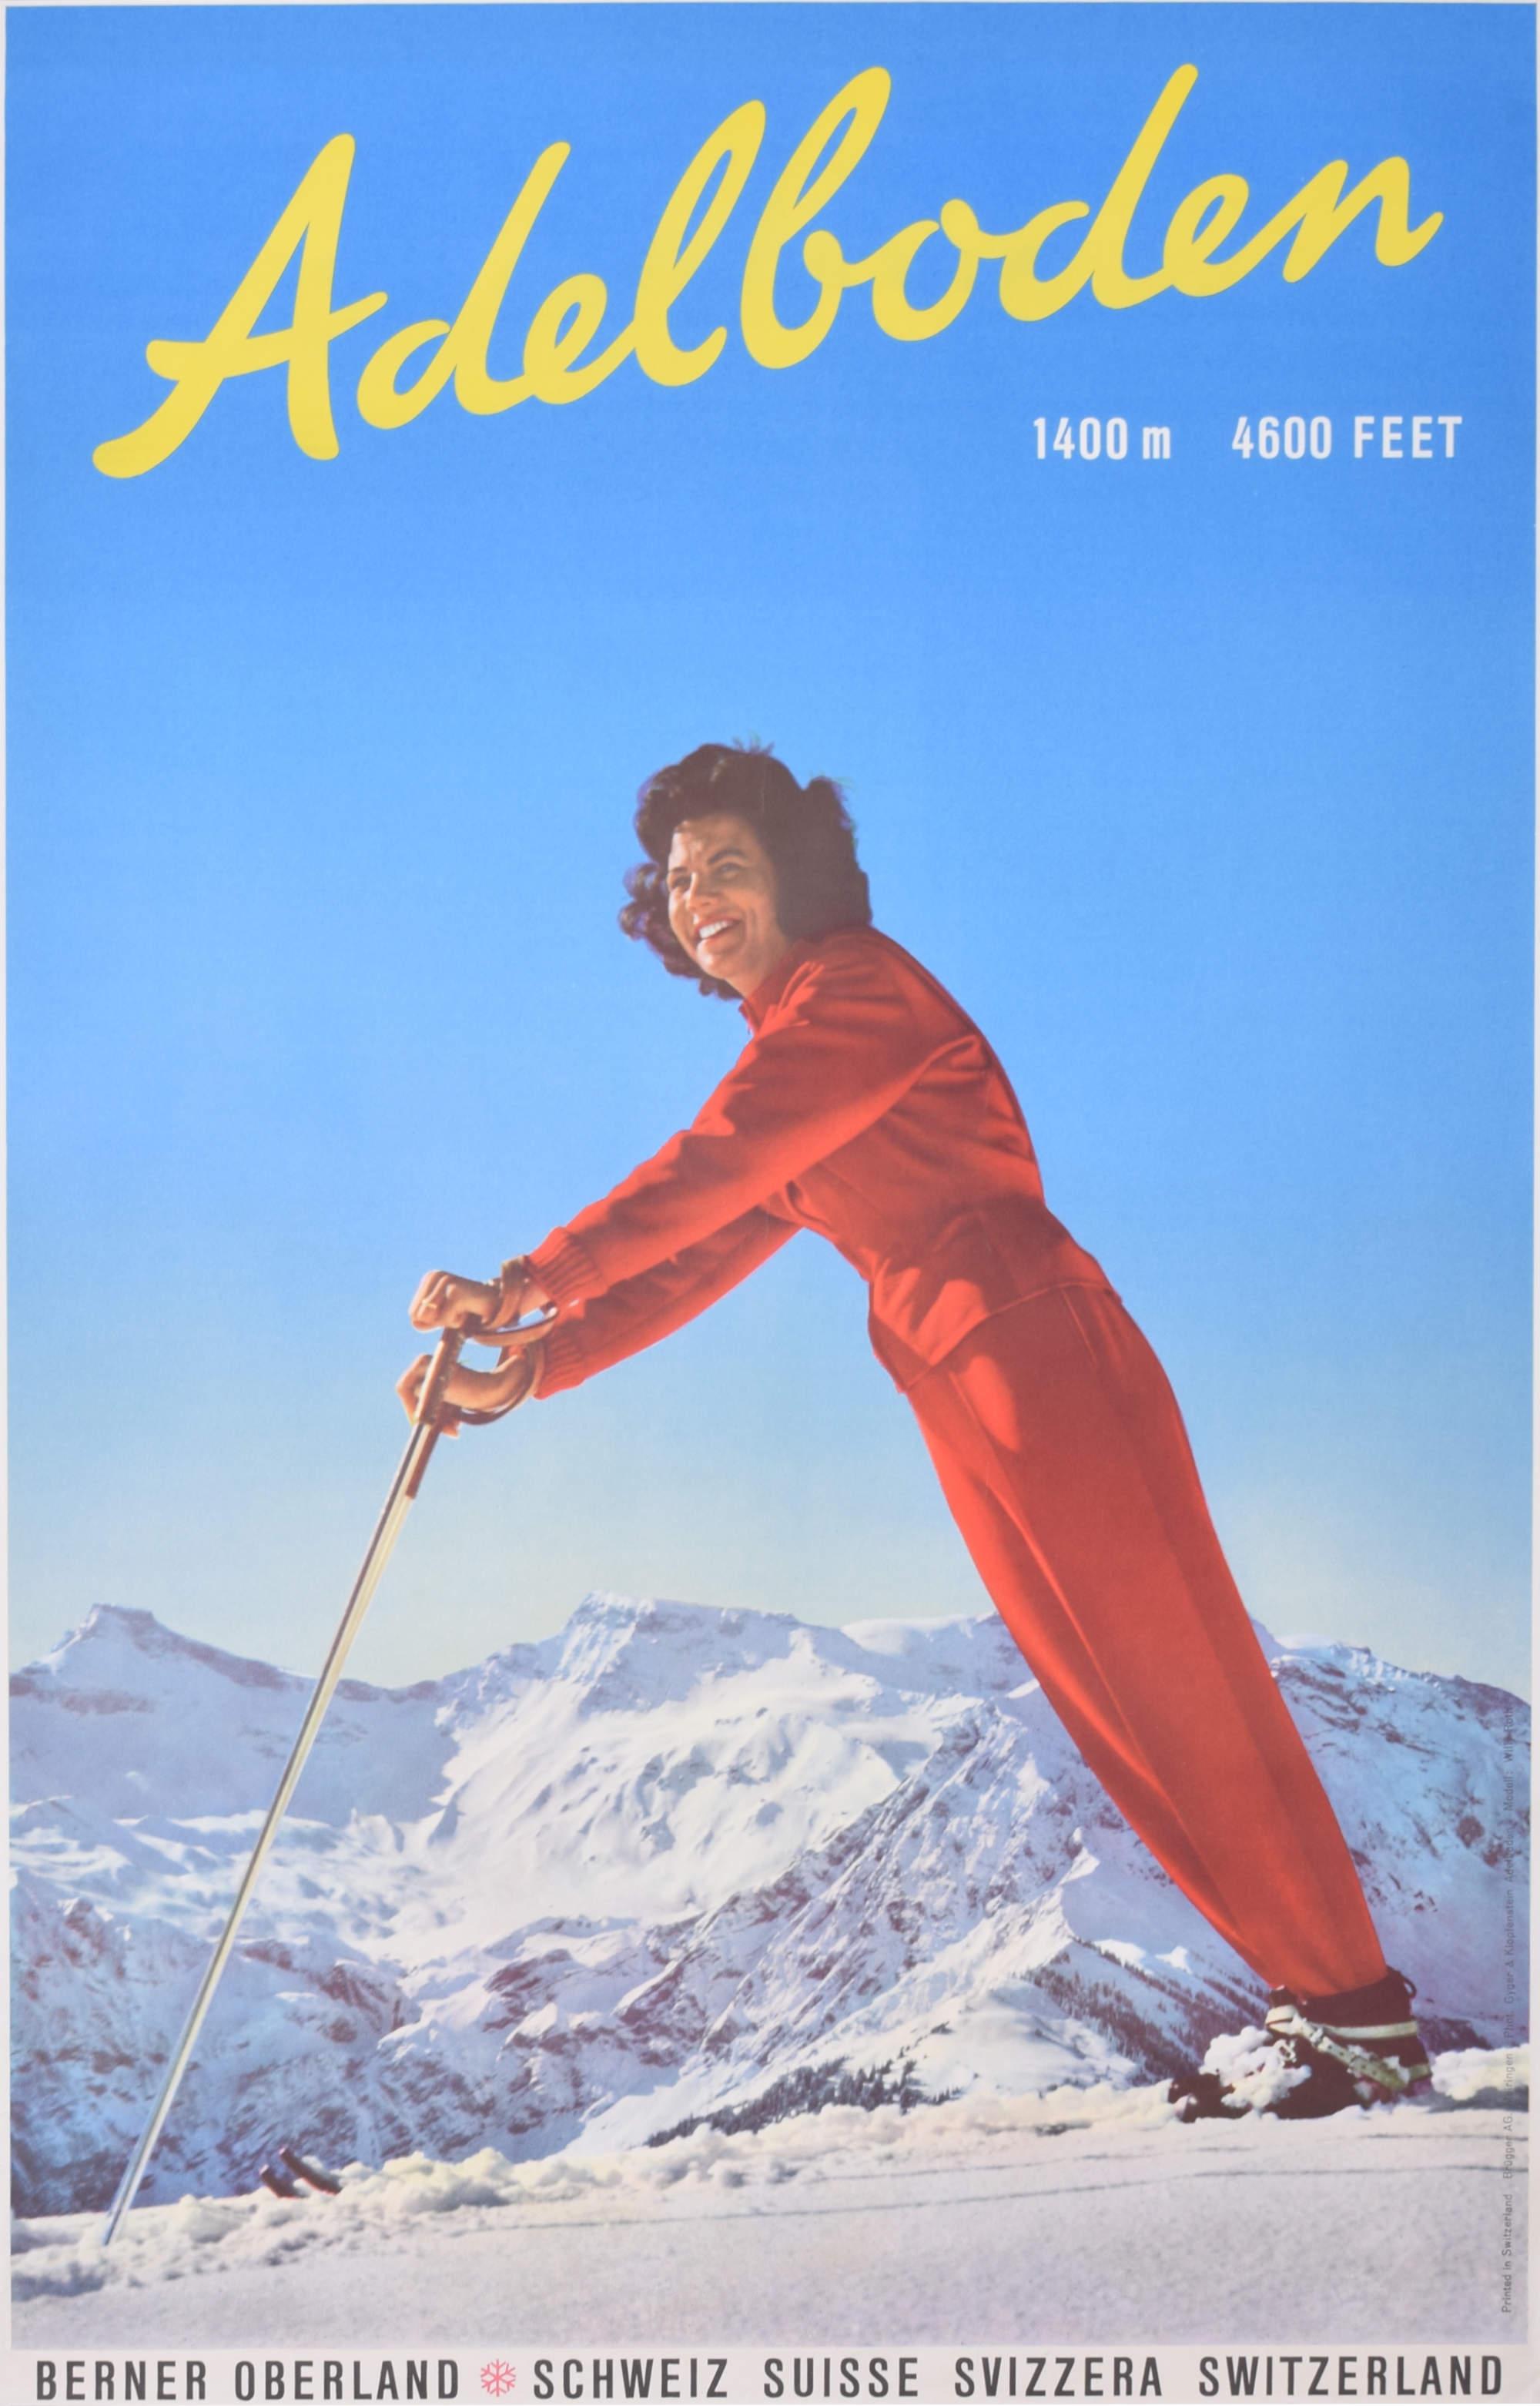 Adelboden original vintage Swiss skiing poster - Print by Unknown